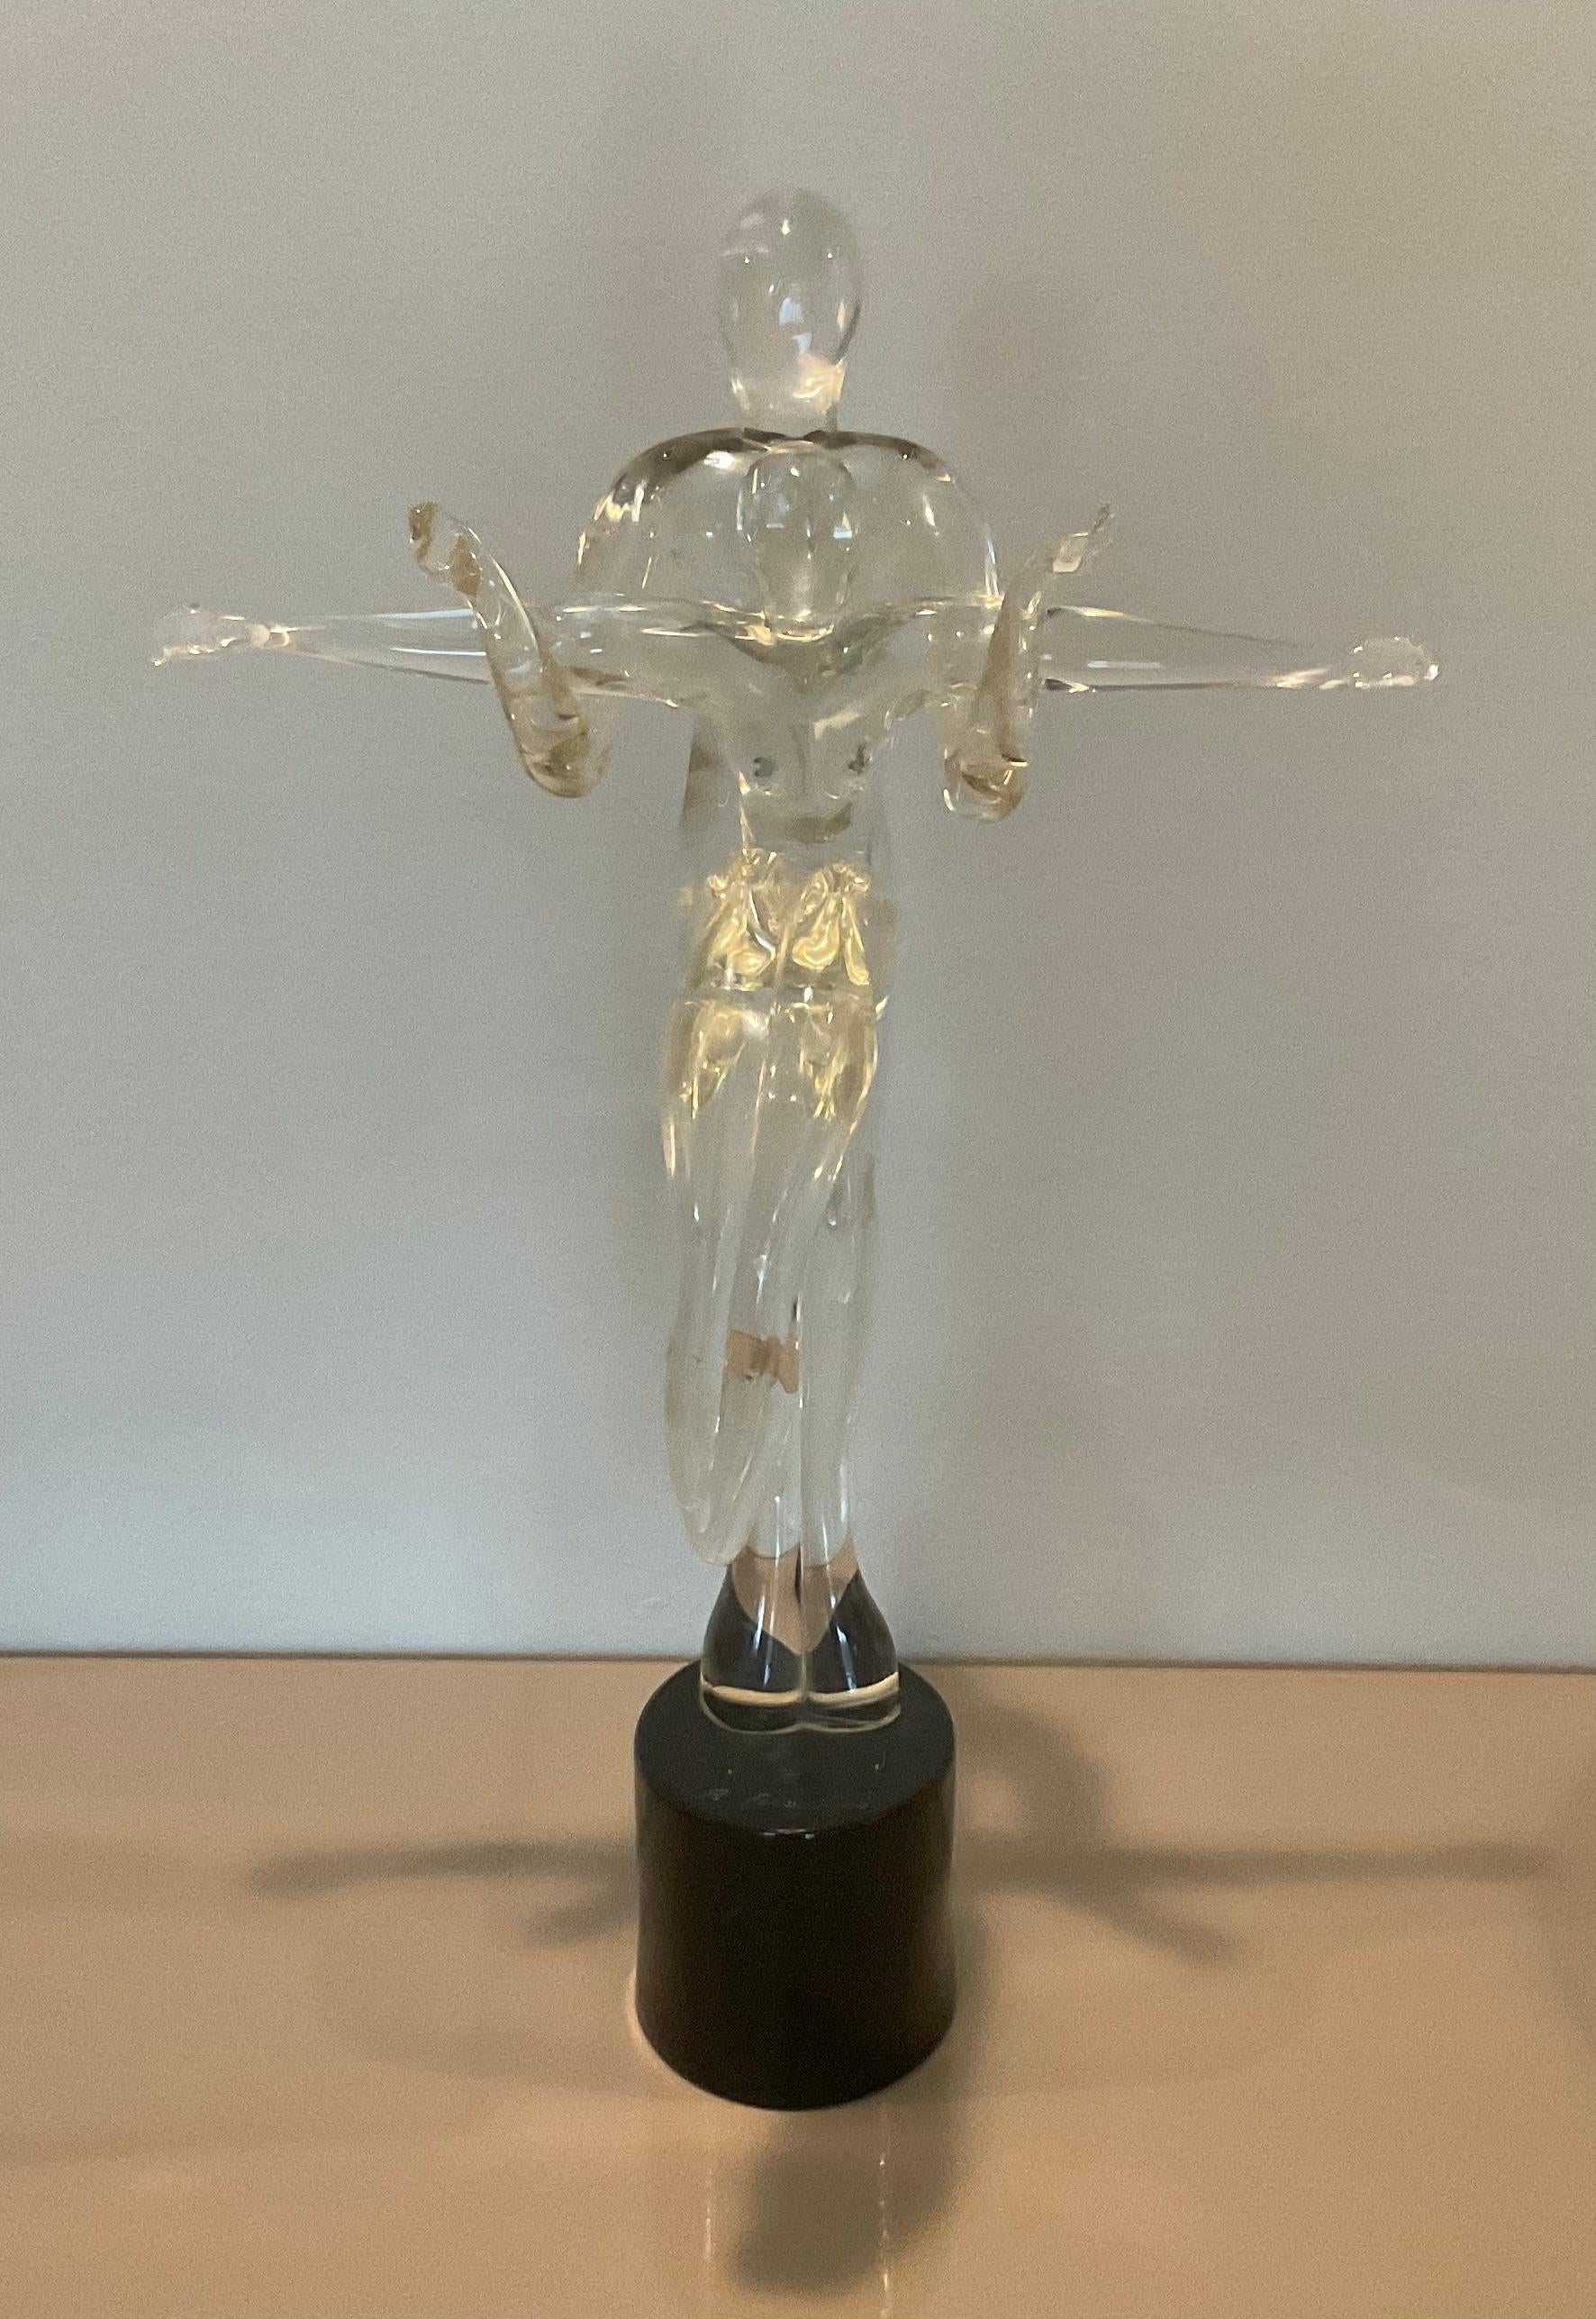 Mid-Century Modern Renato Anatra Gymnast Dancer Sculpture Murano Art Glass Signed by the Artist For Sale